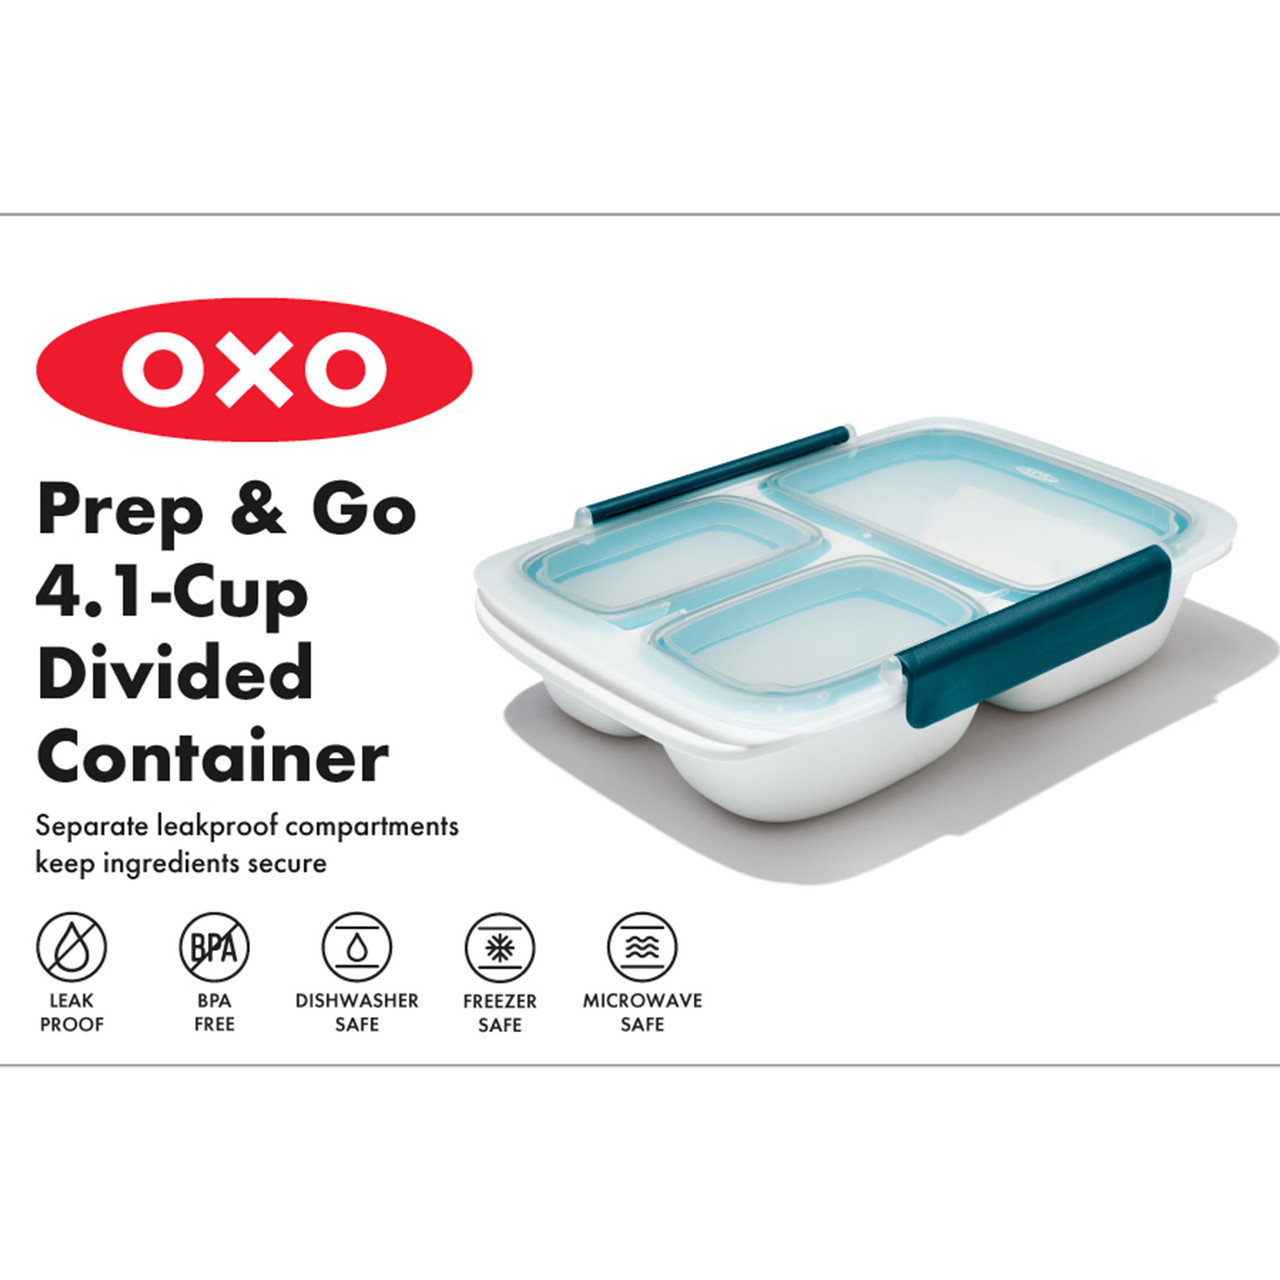 OXO Good Grips Prep & Go Leakproof 2 Cup Divided Container